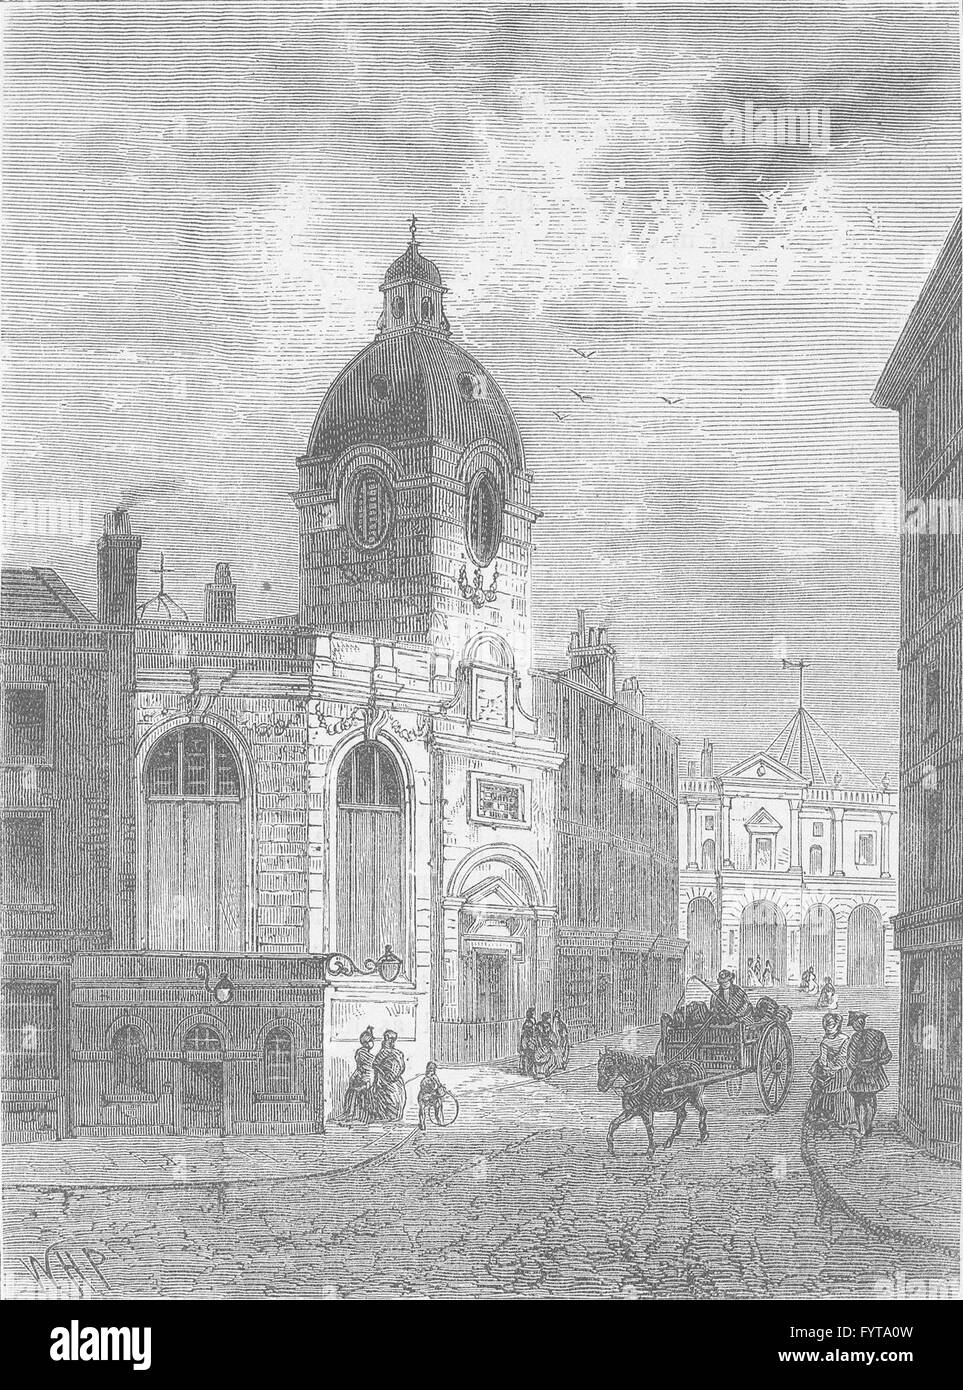 THE BANK OF ENGLAND: The church of St.Benet Fink. London, antique print c1880 Stock Photo